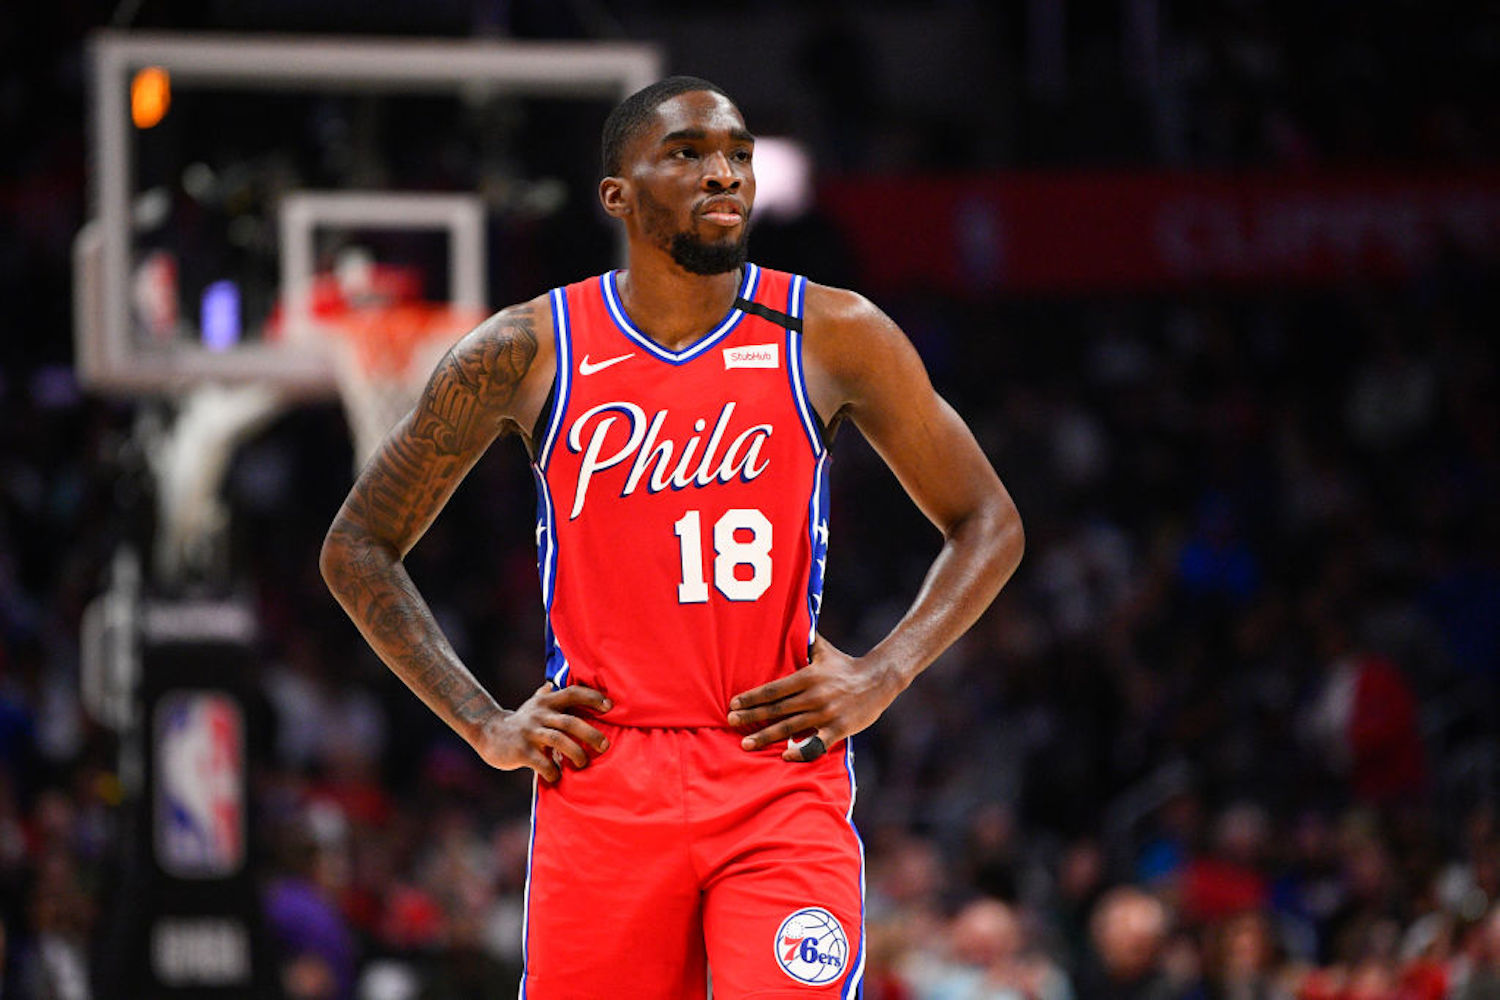 James Harden is interested in joining the Philadelphia 76ers, and Shake Milton may be the trade piece who can make it happen.